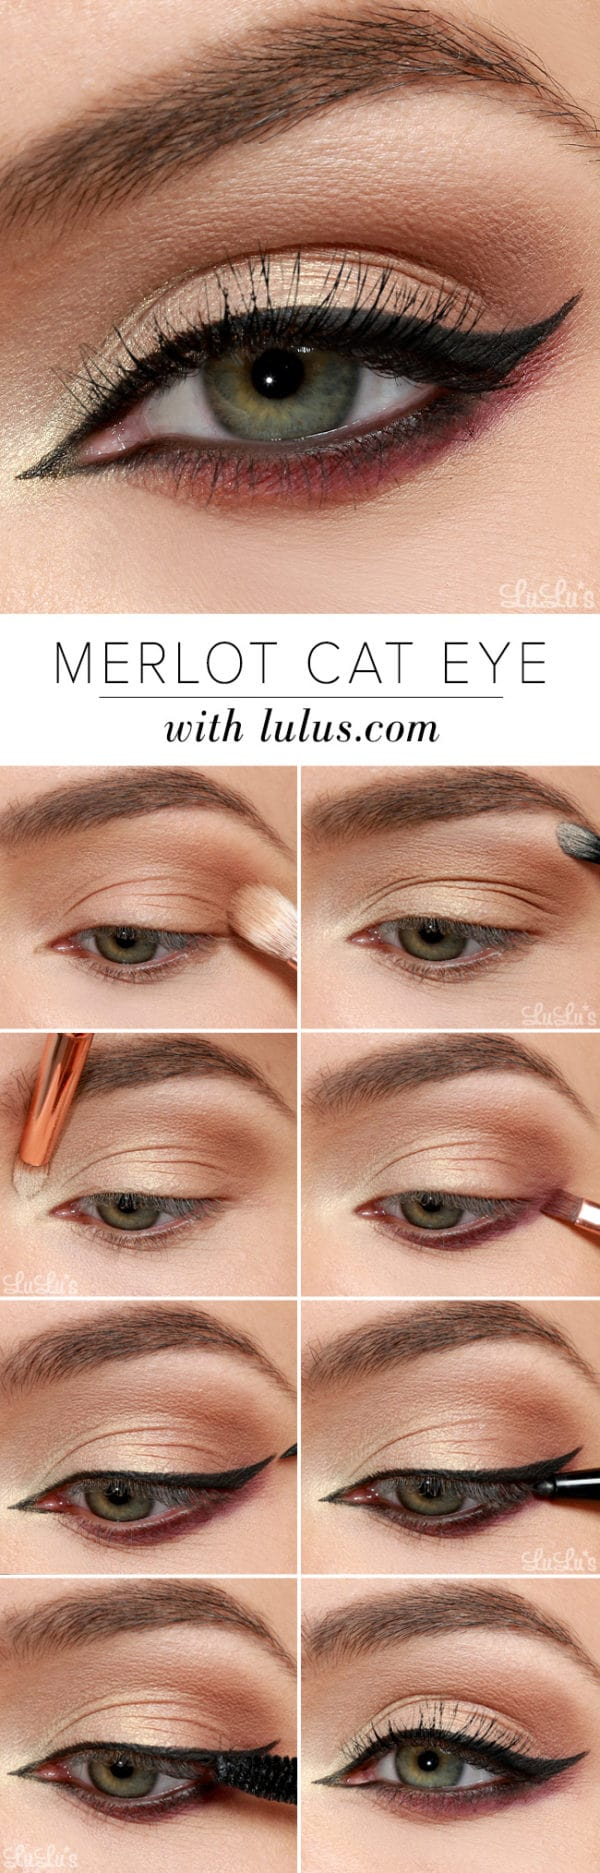 Cat Eye Makeup Tips The Best Step Step Tutorials For Perfect Smokey Eyes Make Up